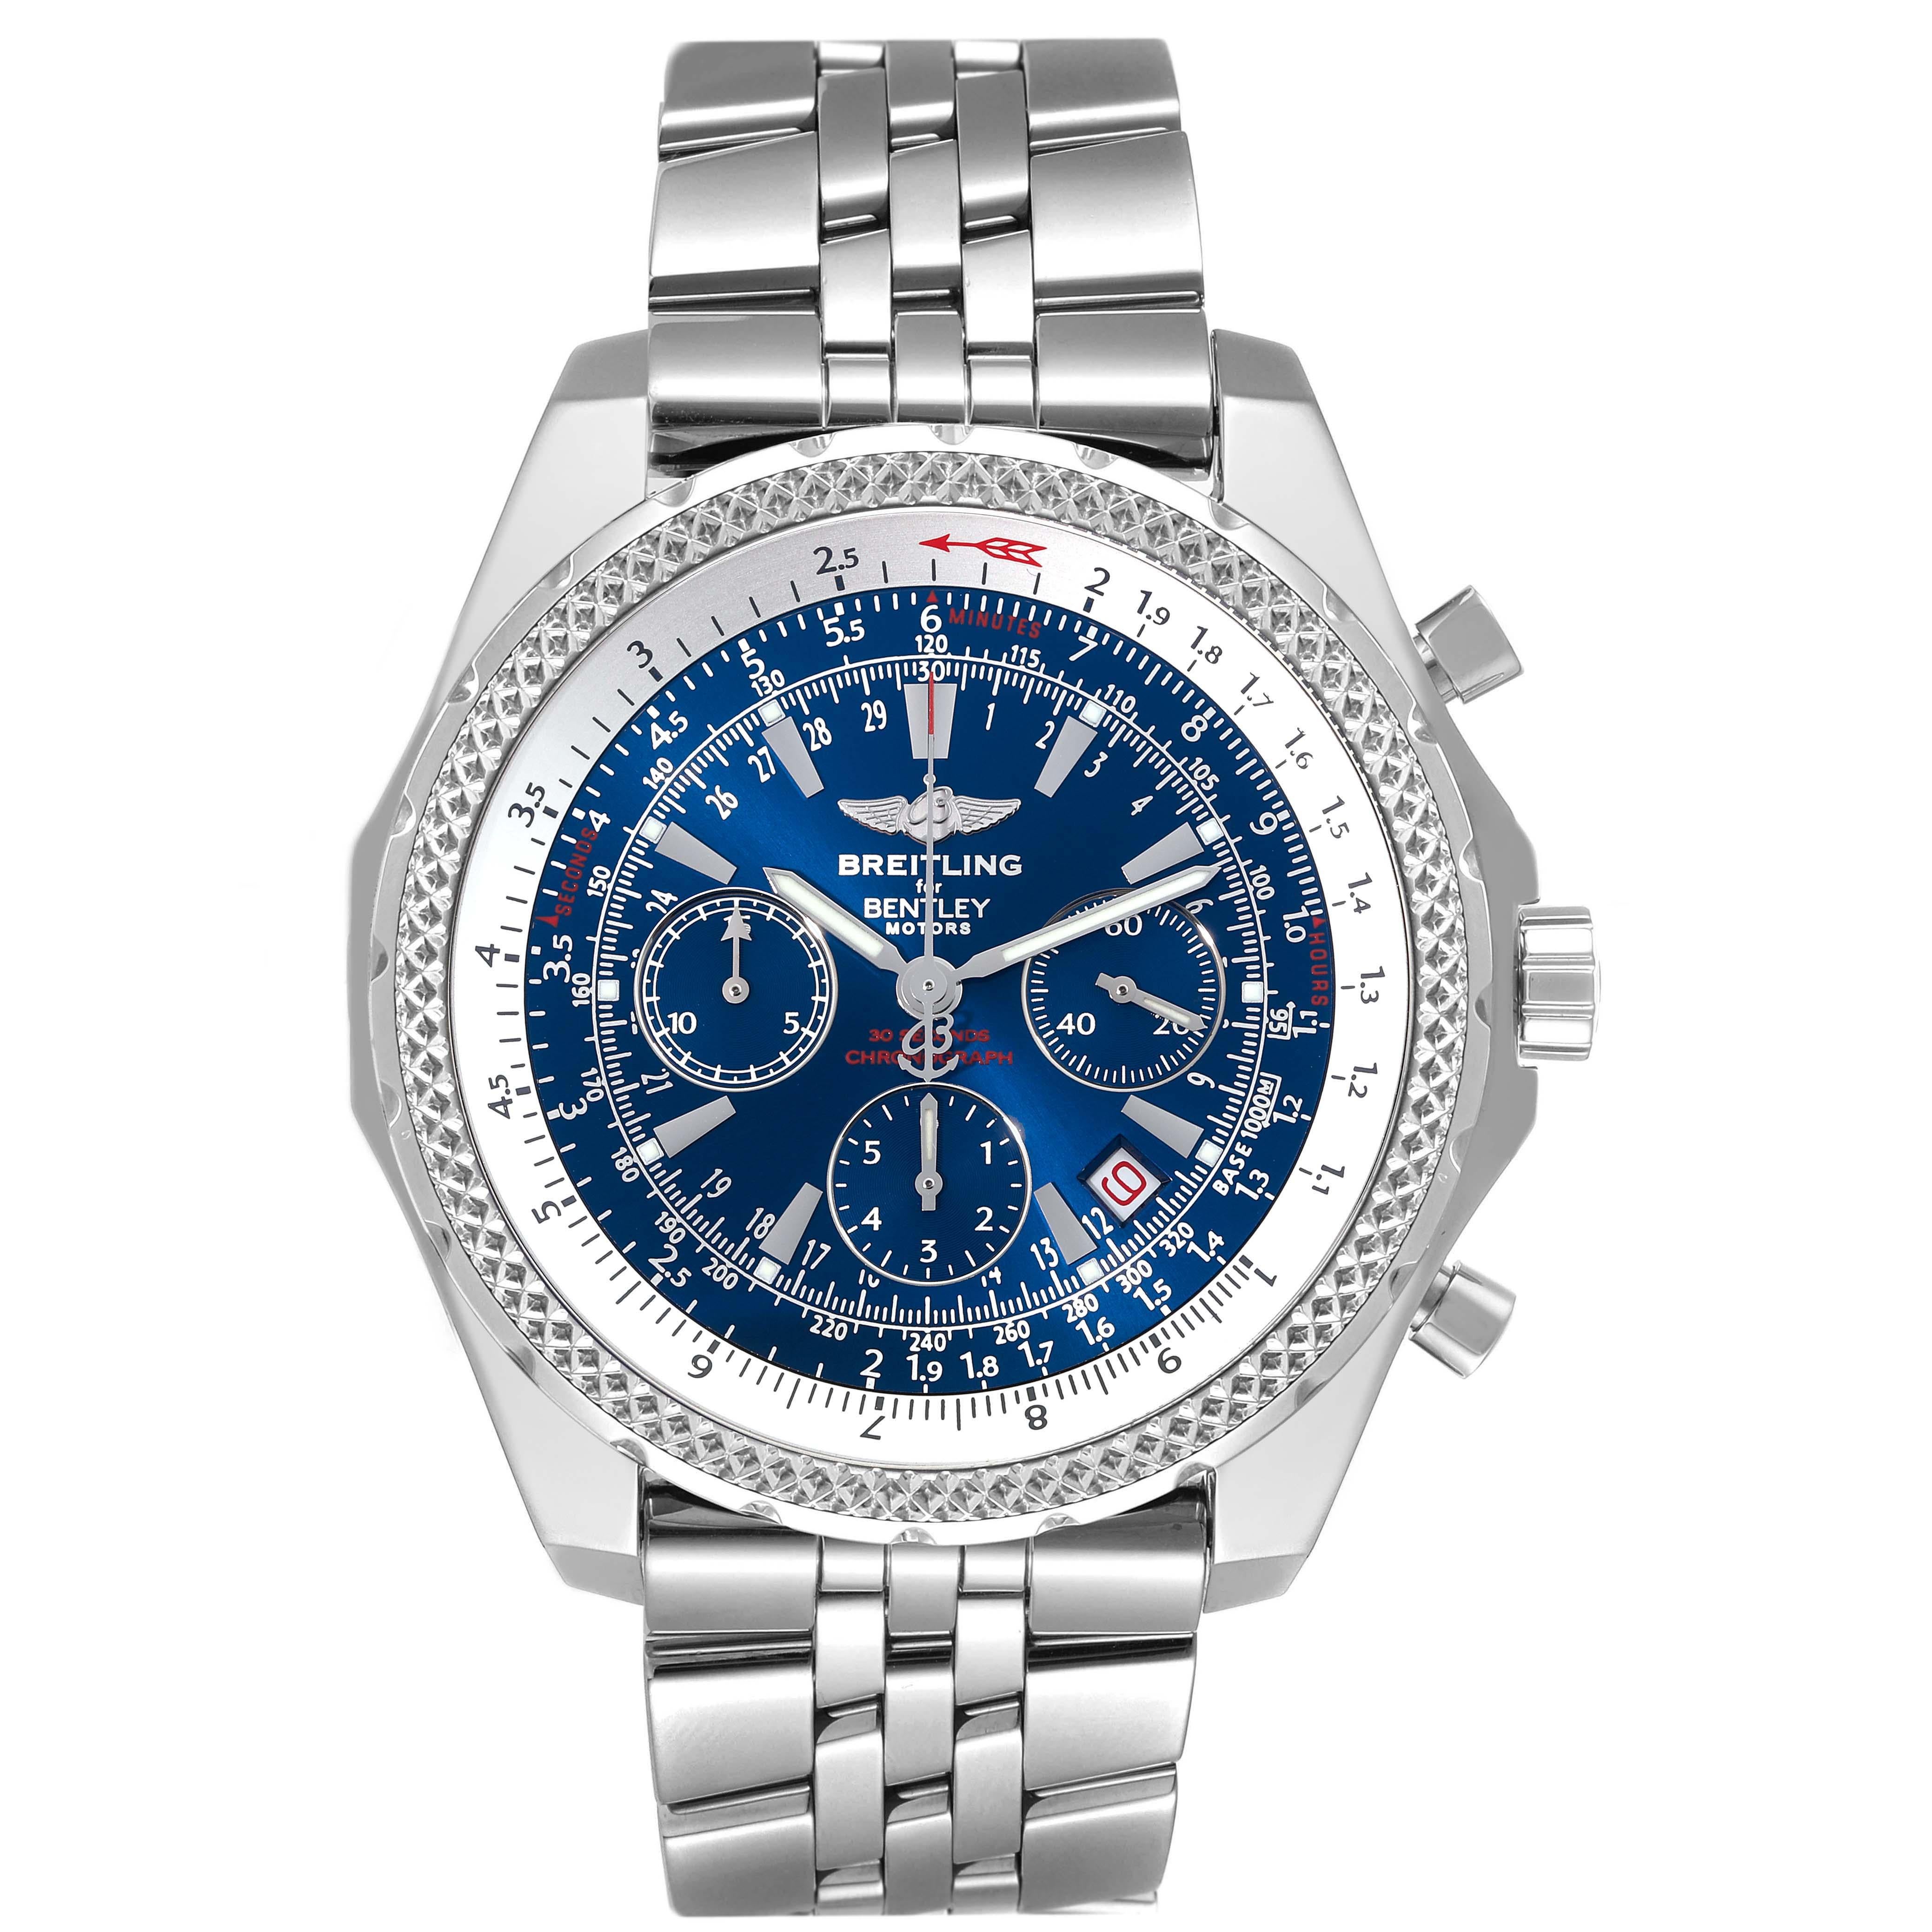 Breitling Bentley Motors Blue Dial Chronograph Steel Mens Watch A25362. Automatic self-winding officially certified chronometer movement. Chronograph function. Stainless steel case 49 mm in diameter. Stainless steel screwed-down crown and pushers.